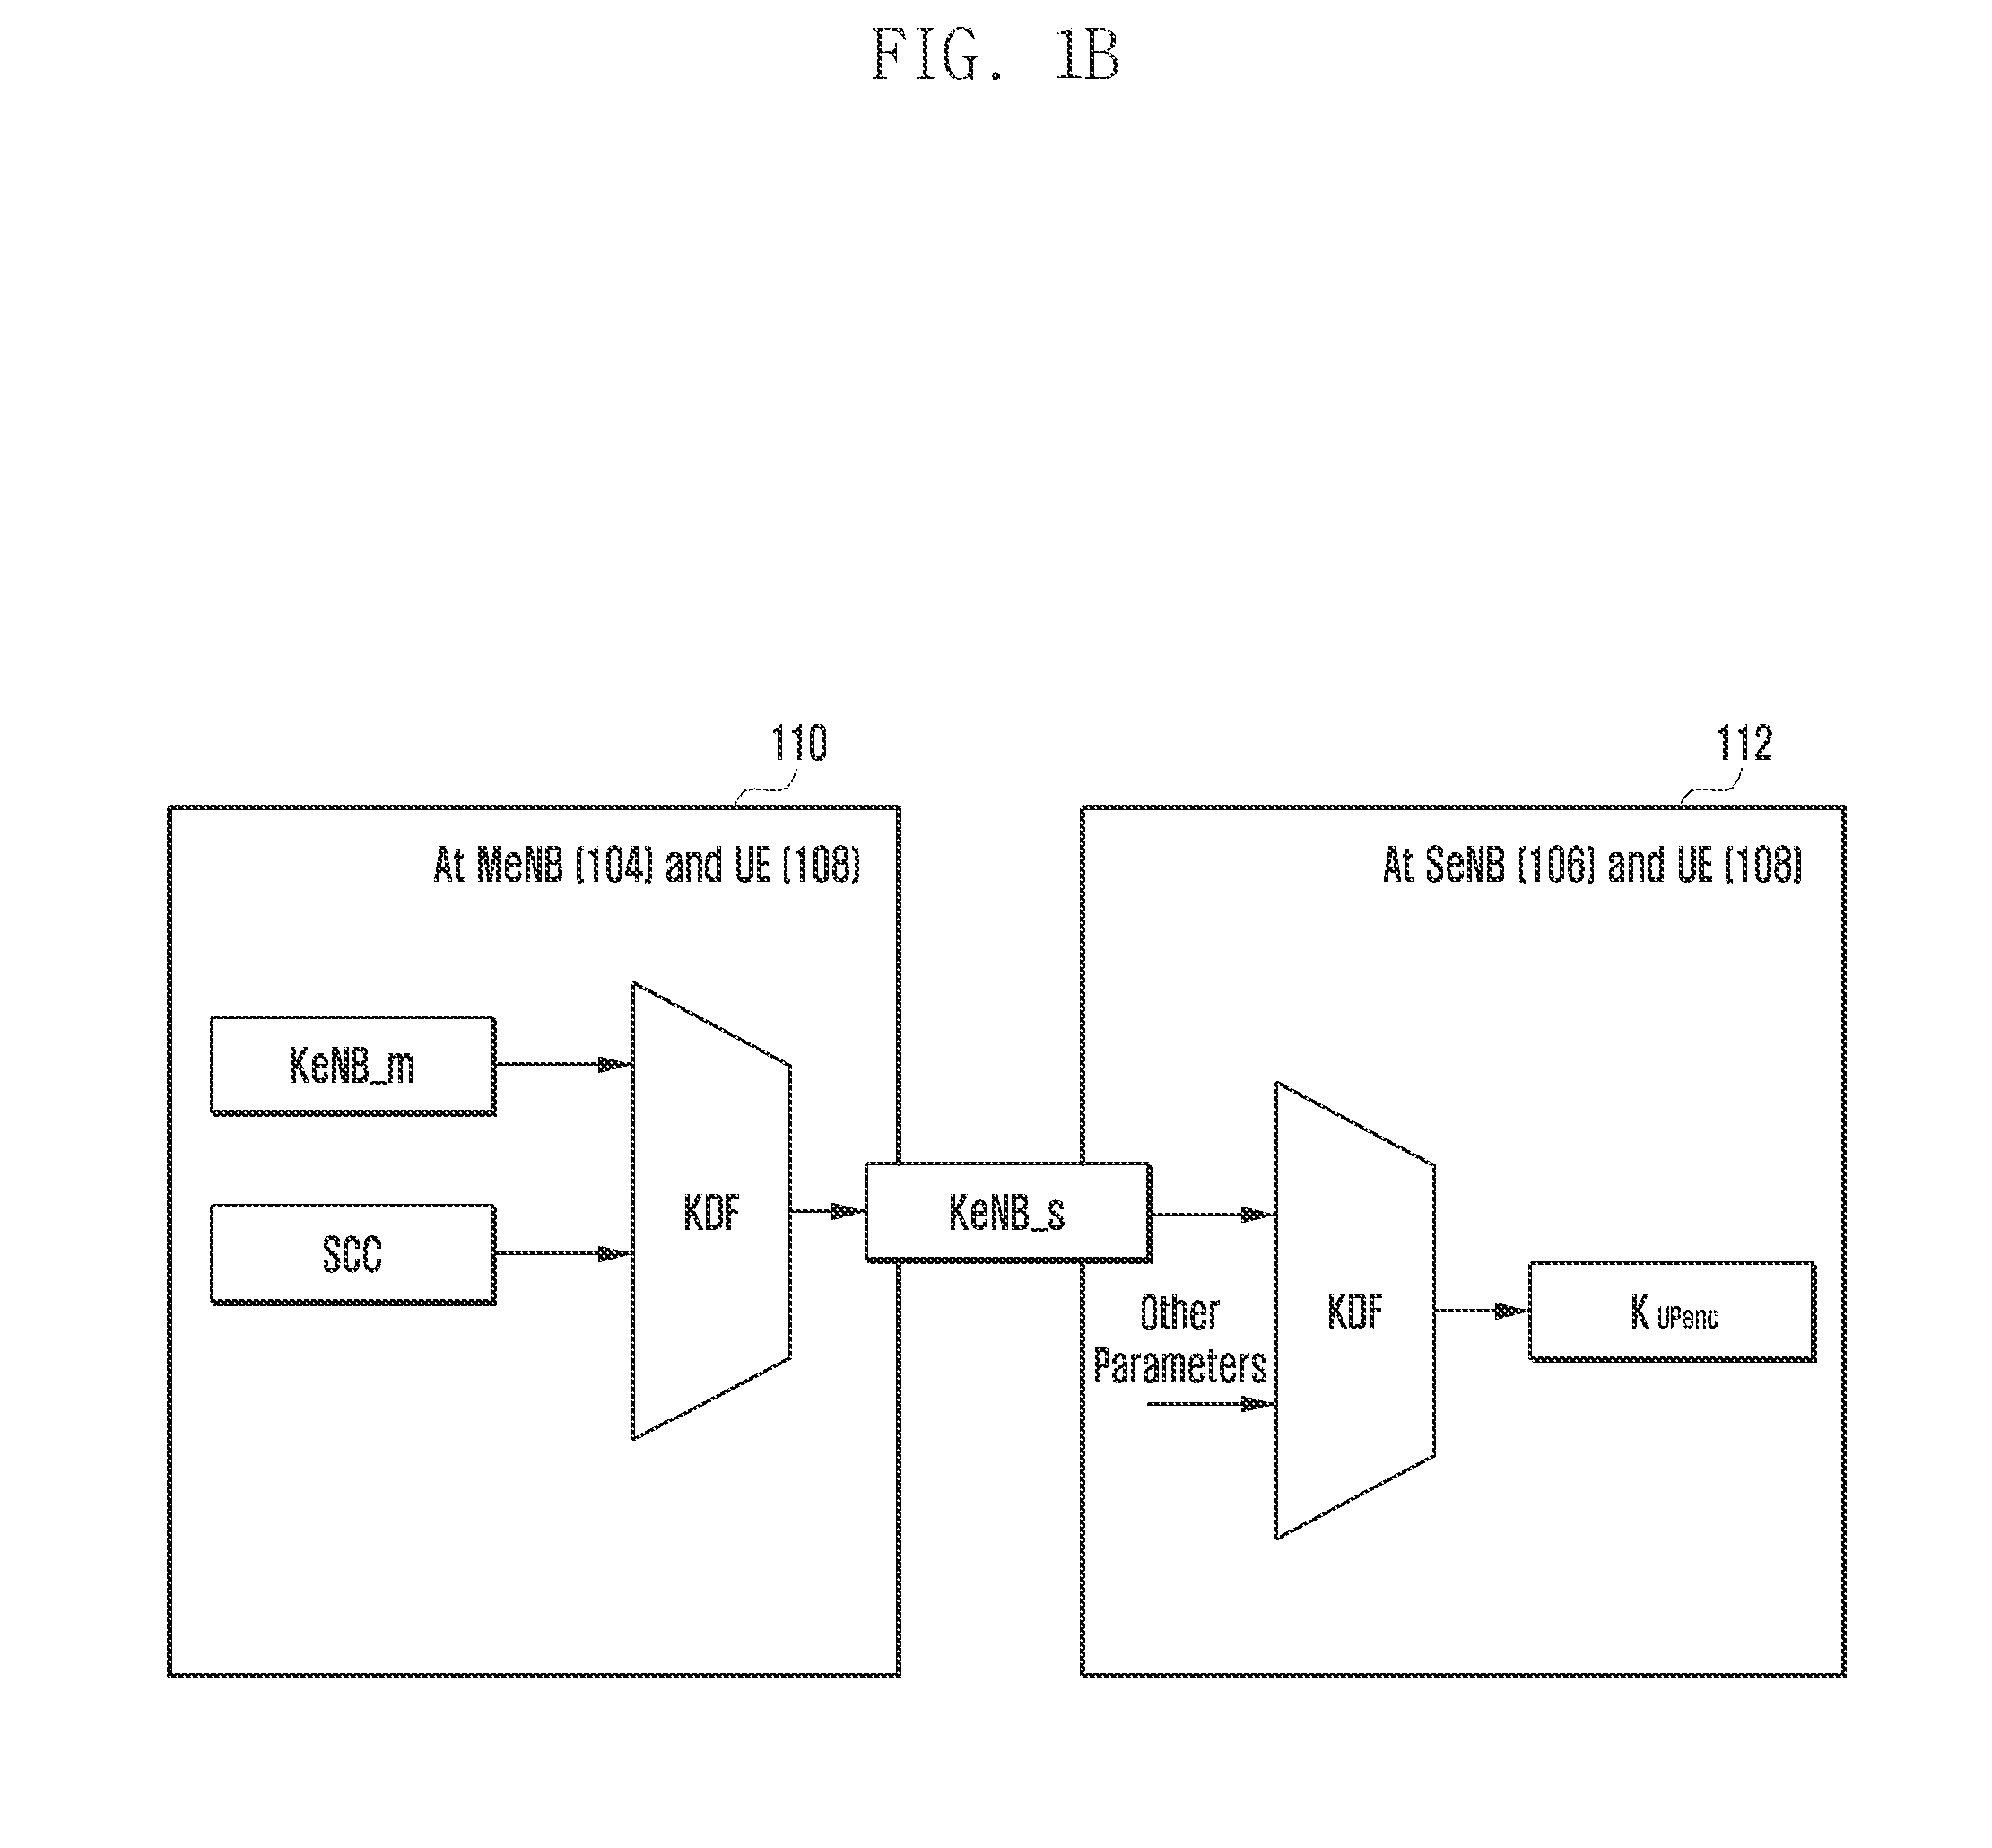 Method and system to enable secure communication for inter-enb transmission